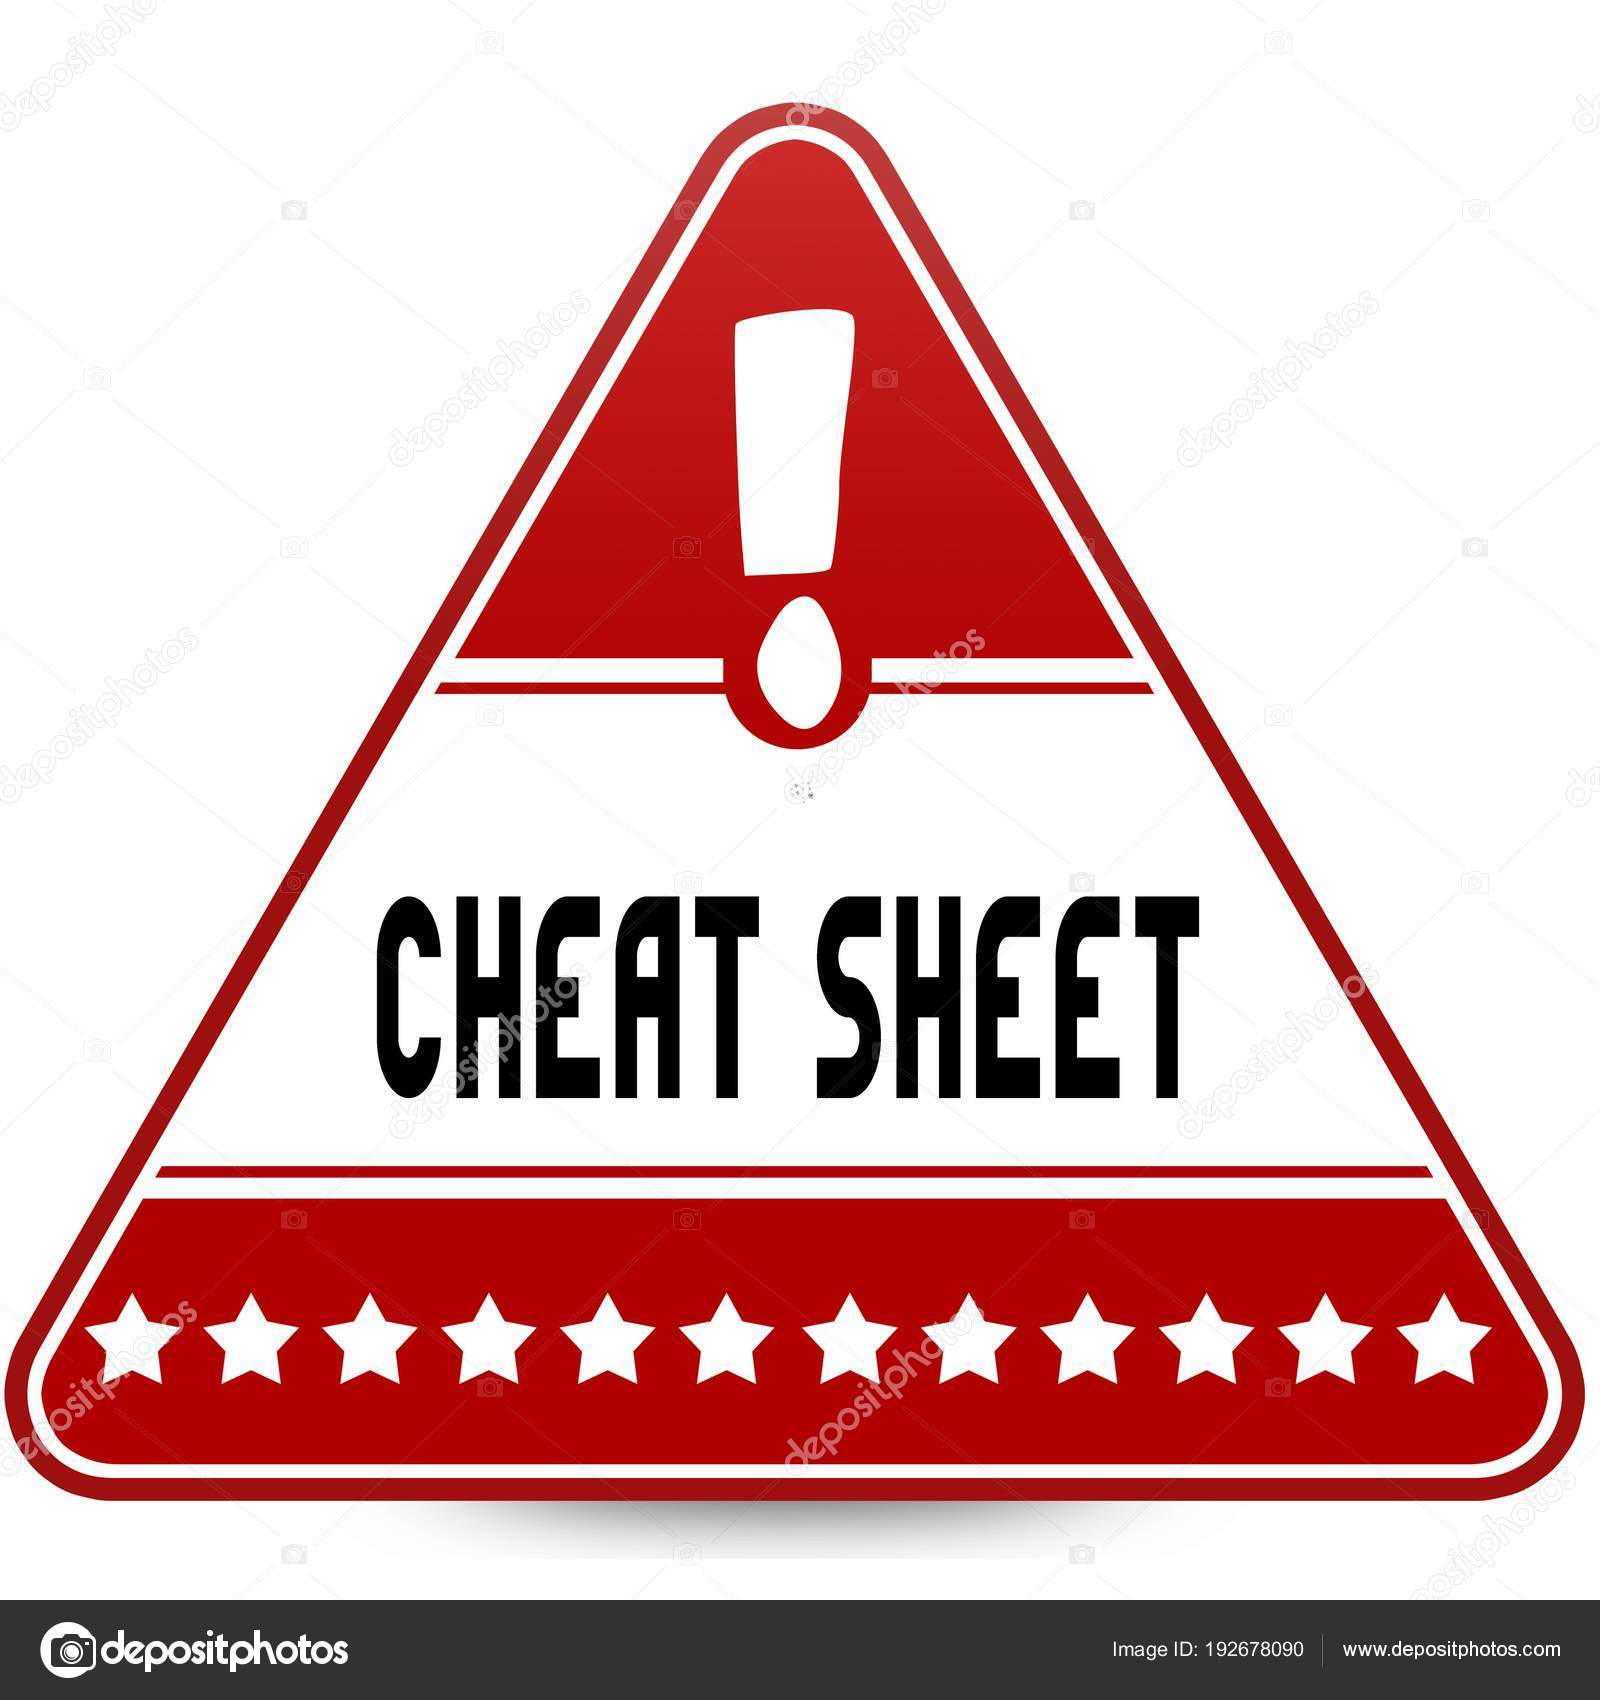 Cheat Sheet On Red Triangle Road Sign Stock Photo C Ionutparvu